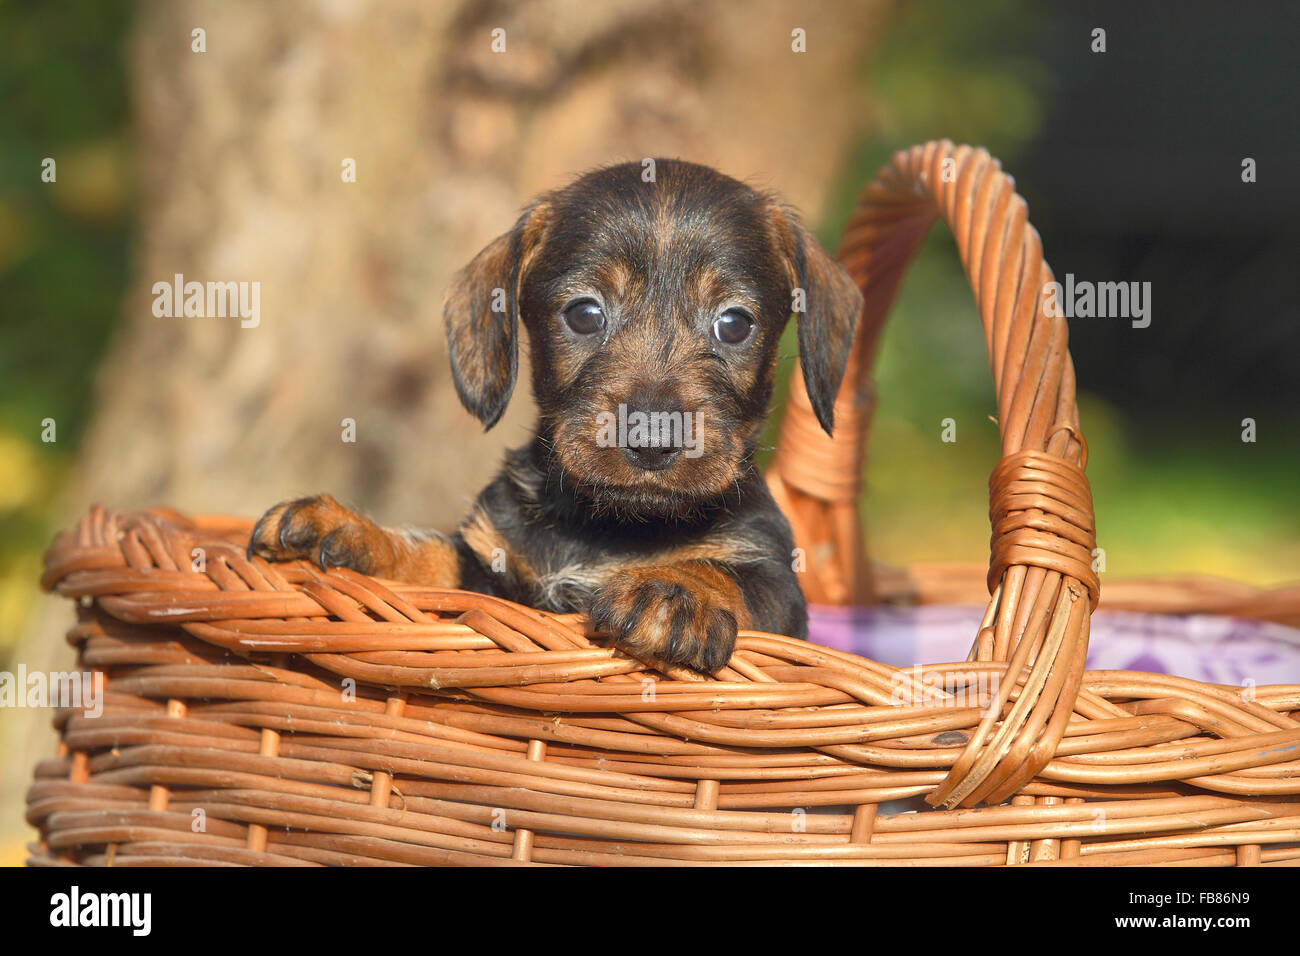 Dachshund (Canis lupus familiaris) puppy sitting in basket, Germany Stock Photo